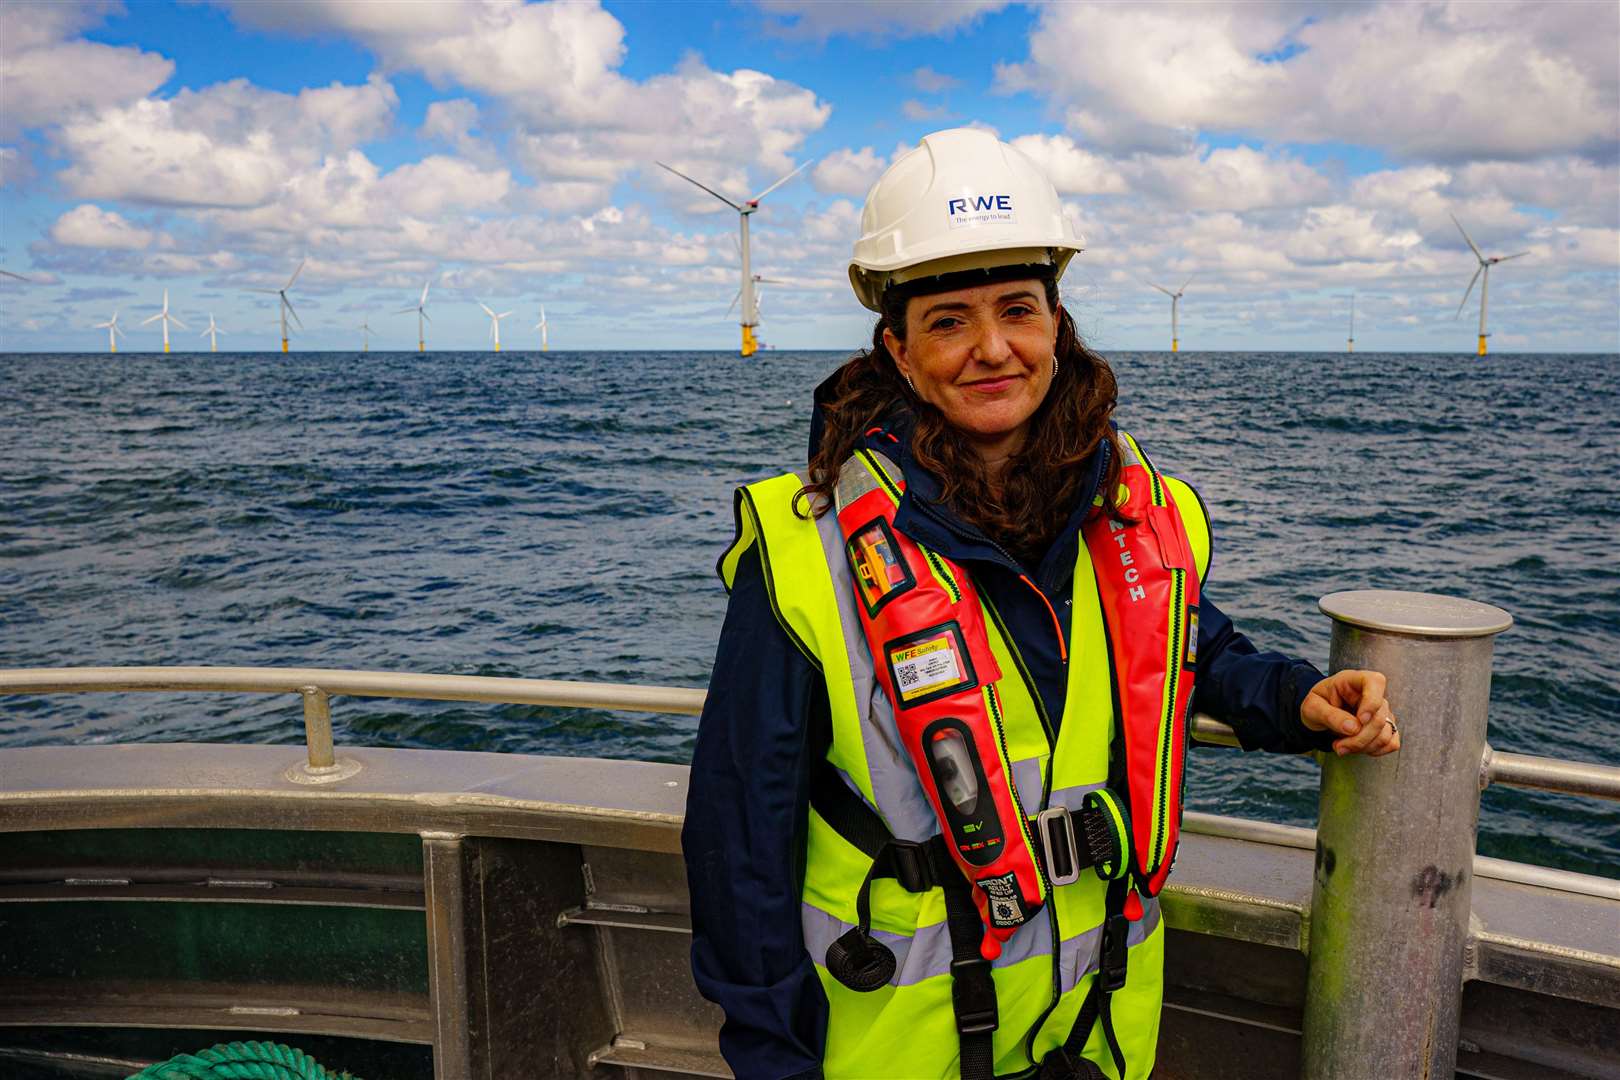 Tamsyn Rowe at RWE’s Gwynt y Mor, one of the world’s largest offshore wind farms located eight miles offshore in Liverpool Bay, off the coast of North Wales (Ben Birchall/PA)